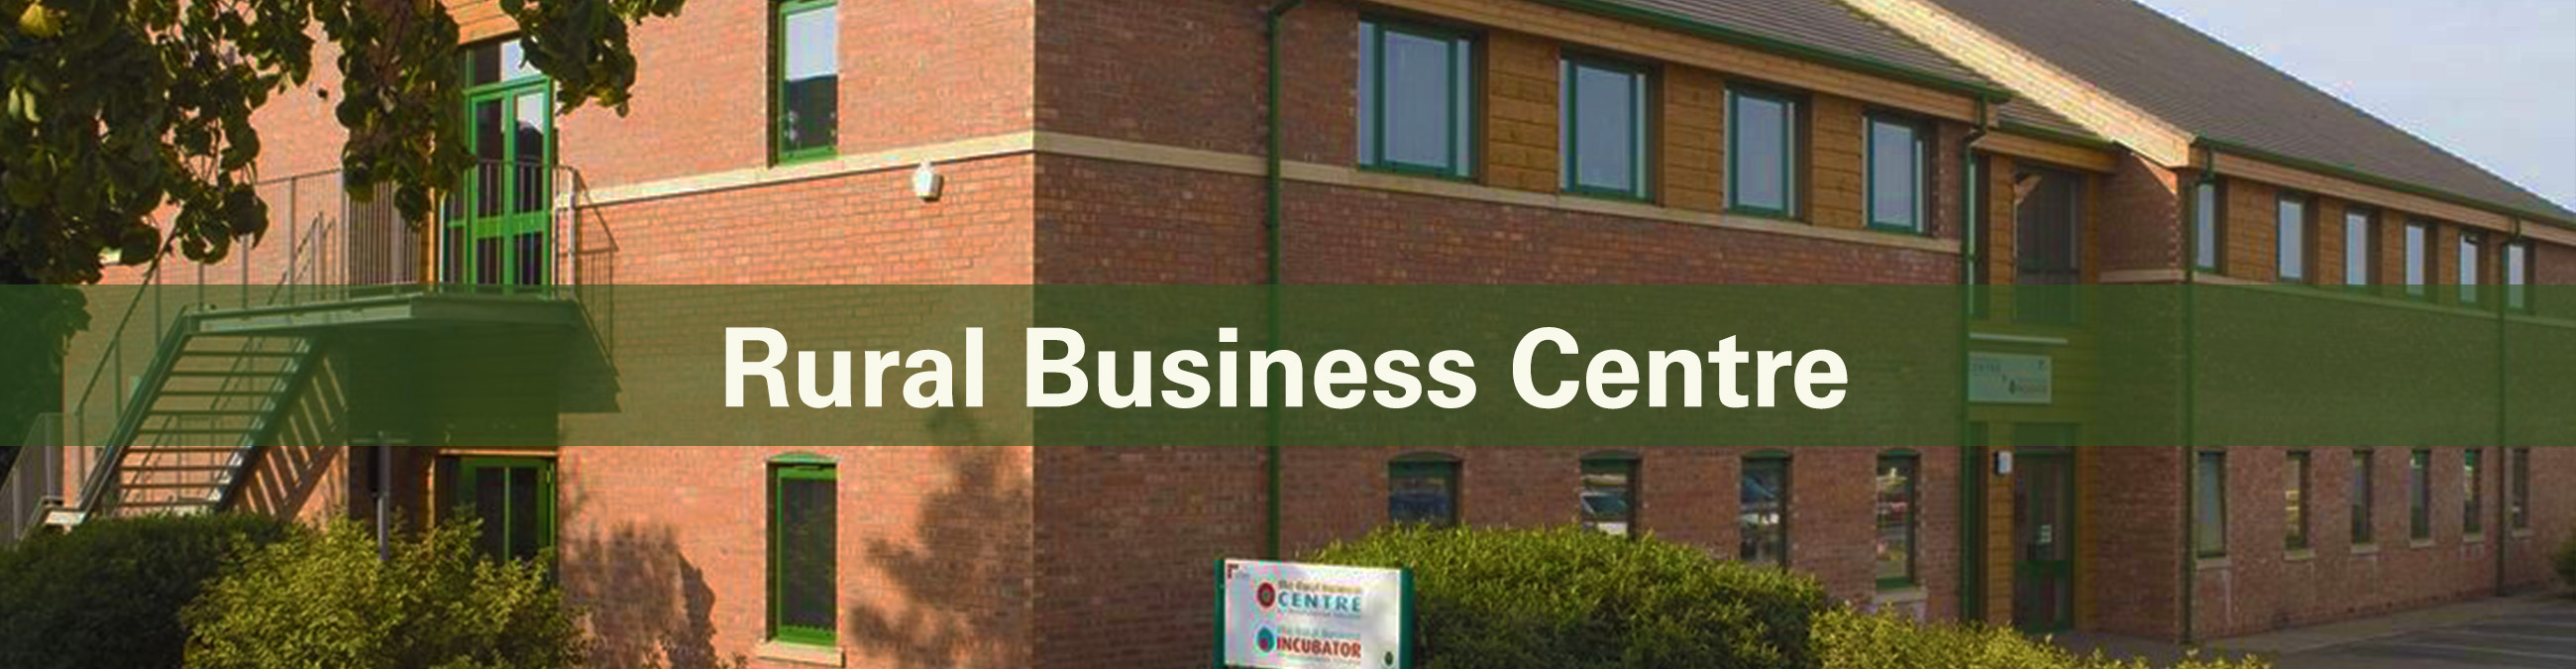 Commercial Services Hero Rural Business Centre Banner Template